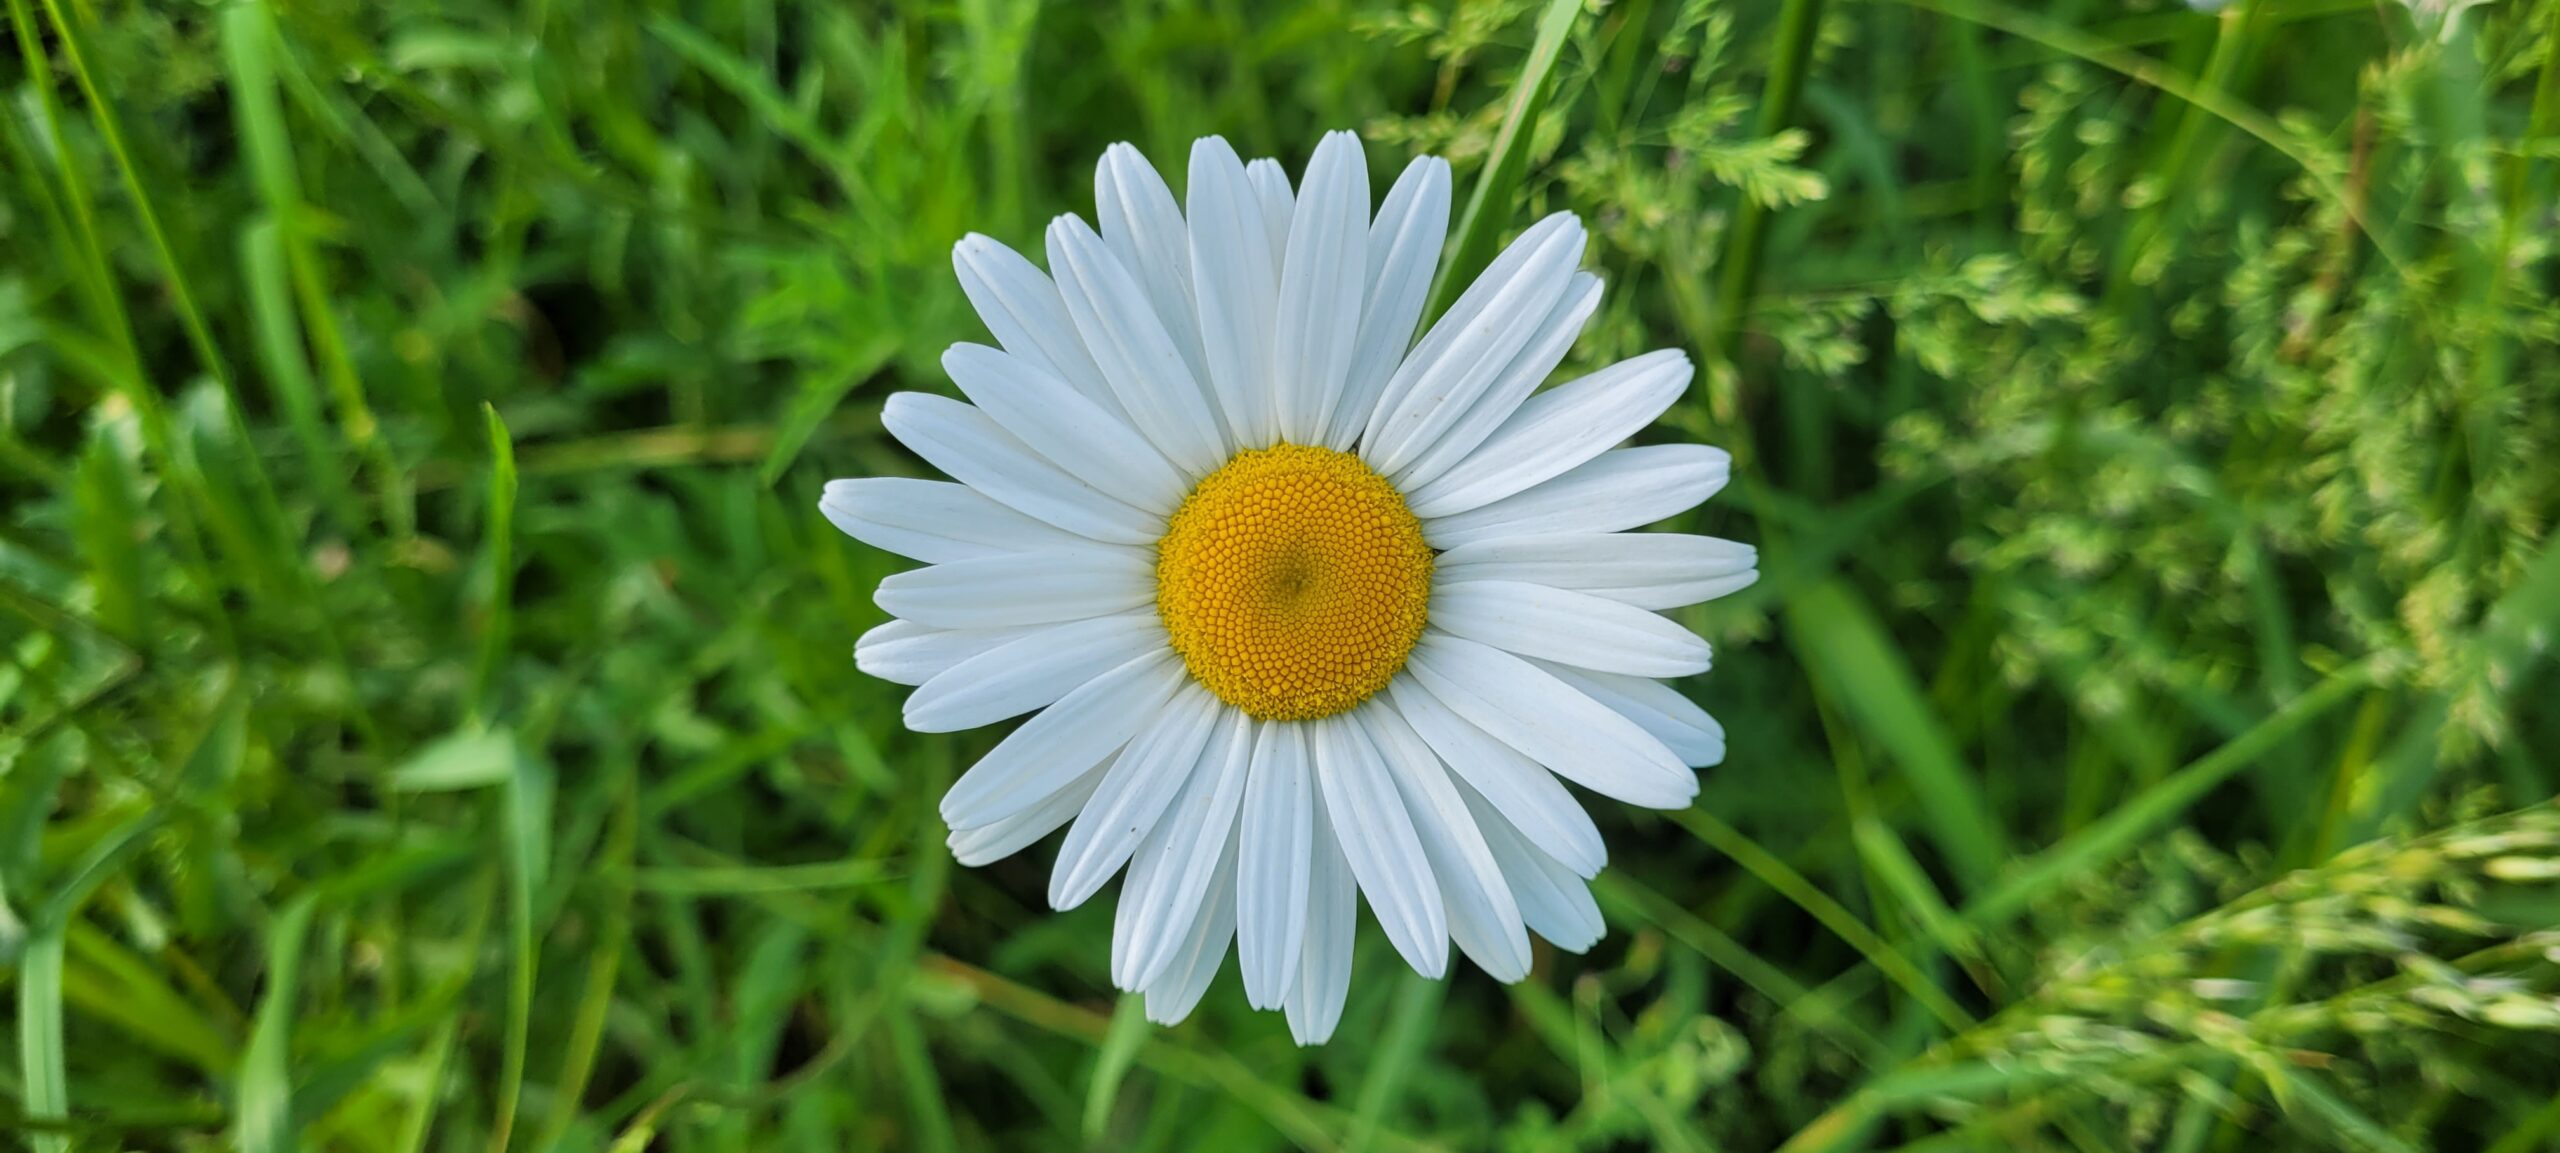 closeup photo of white daisy with yellow center